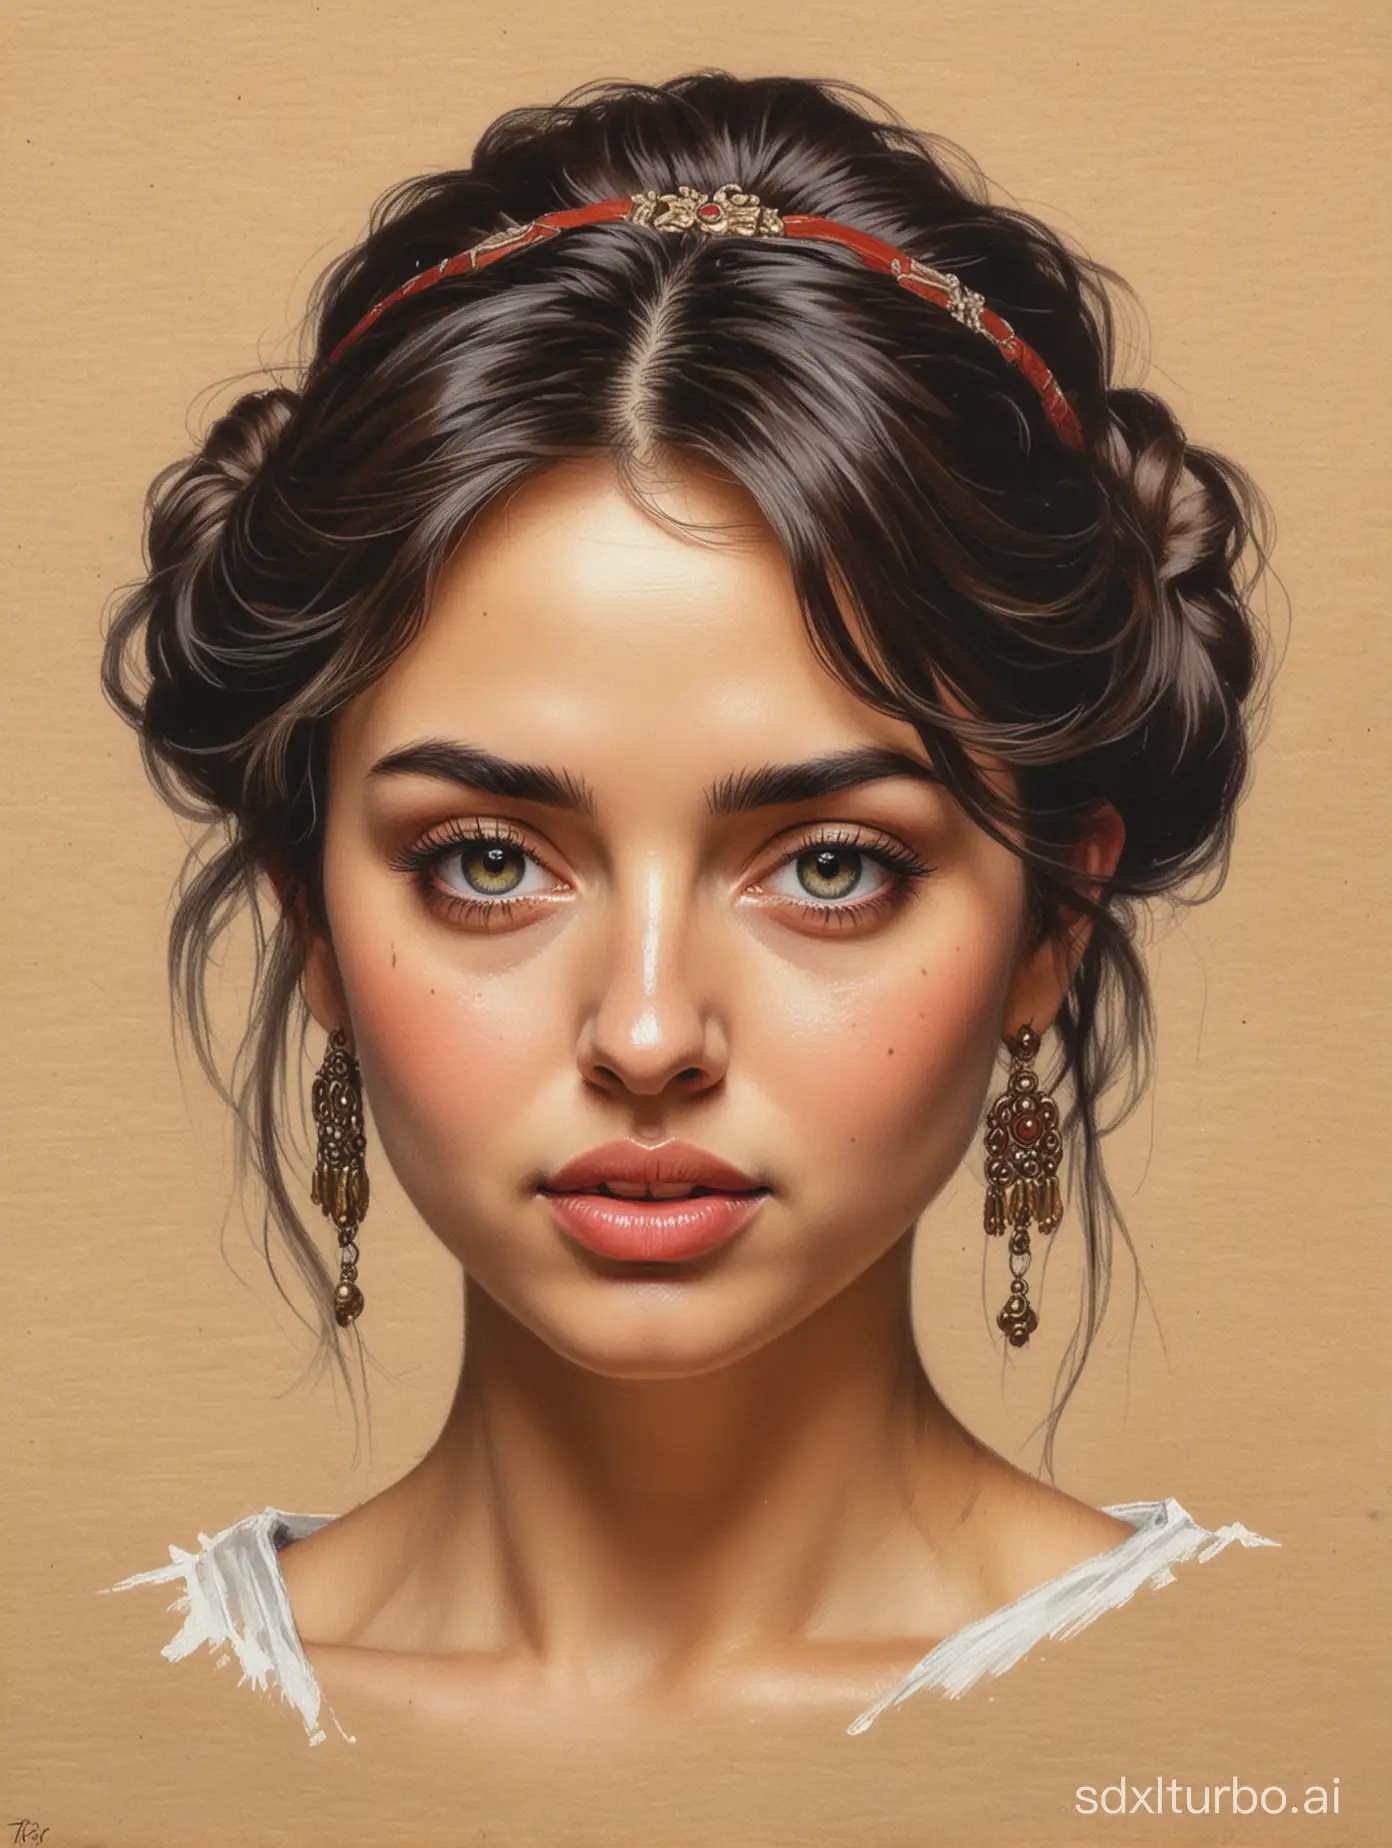 color Pencil sketch of beautiful Ana de Armas, Head sketch by Ilya Repin,Proud, sinister, evil,Big earlobes, Buddha, Keep eyes open, on handmade paper,Martial arts themes,Jin Yong's world view,monochrome,